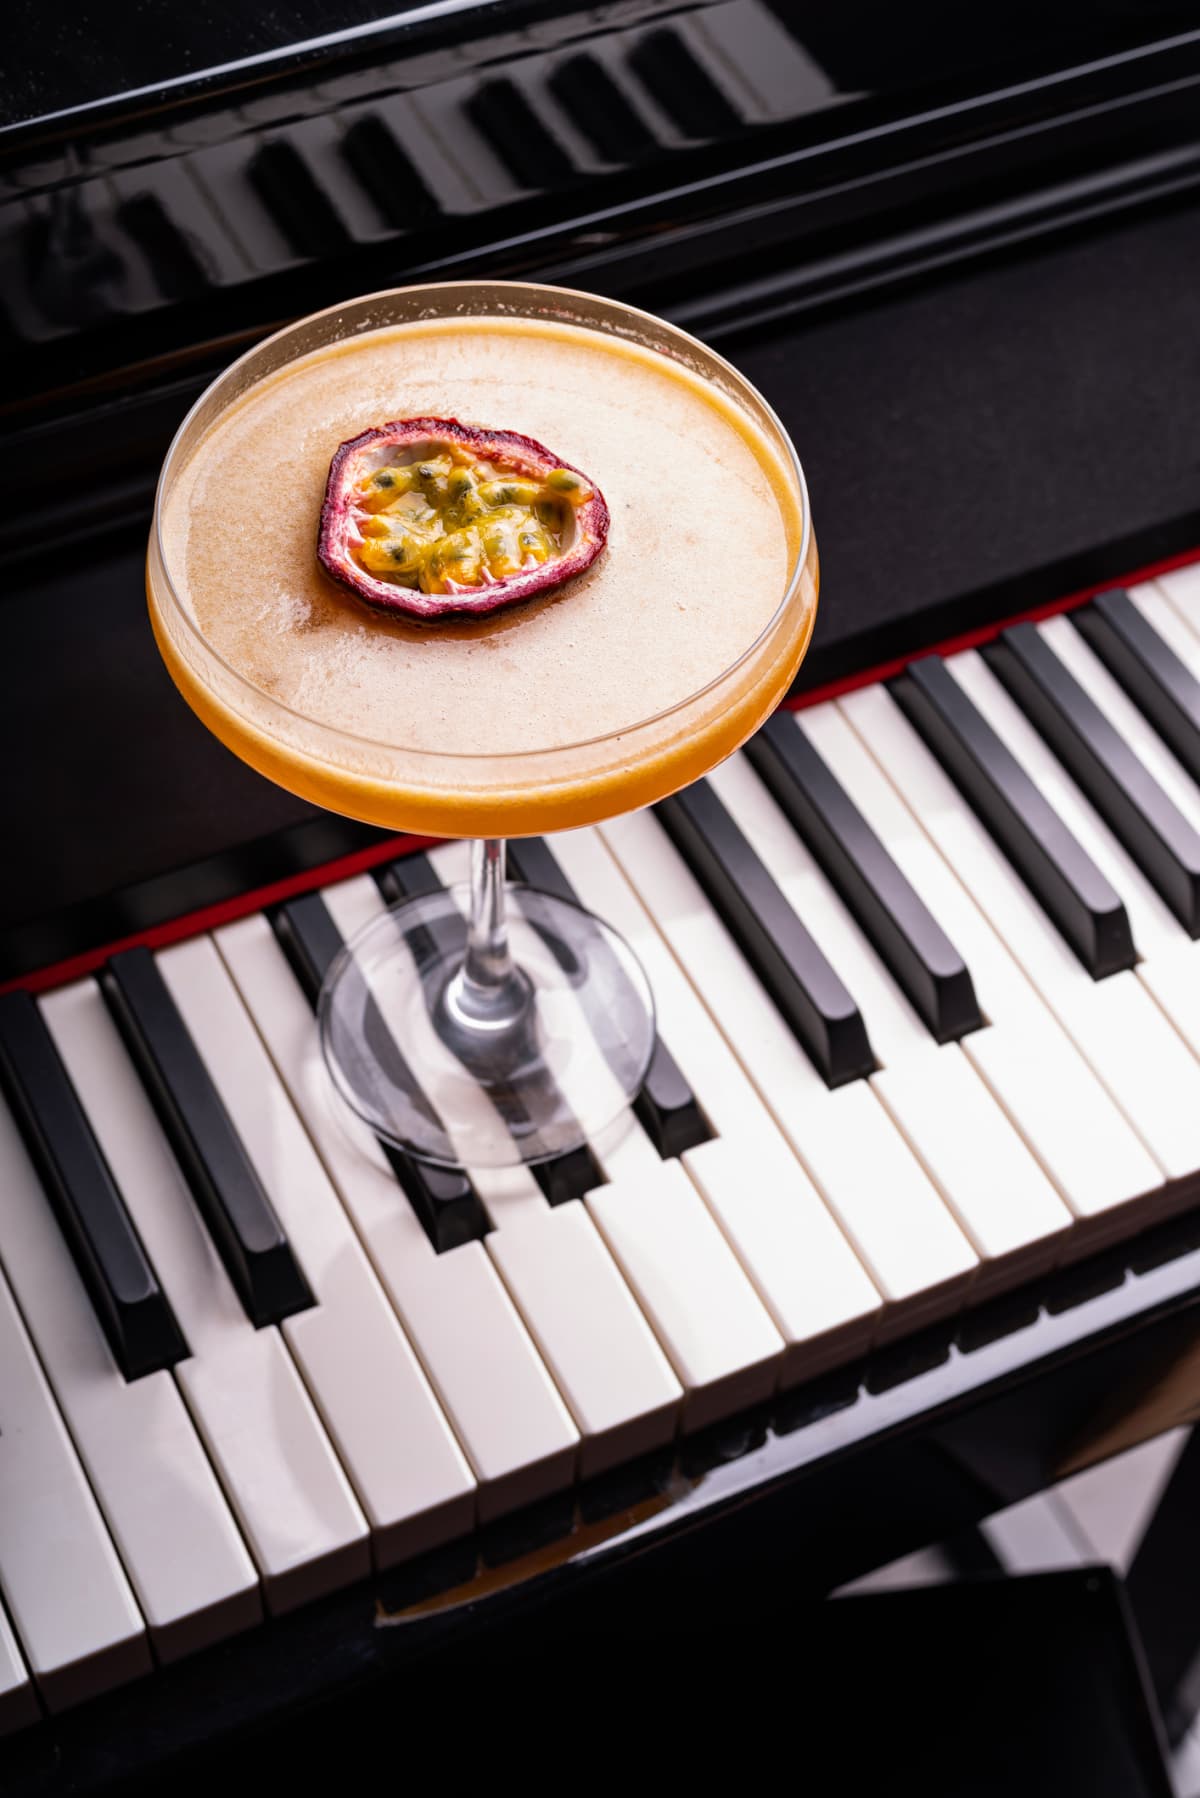 Pornstar Martini cocktail garnished with half of a passionfruit on a piano keyboard